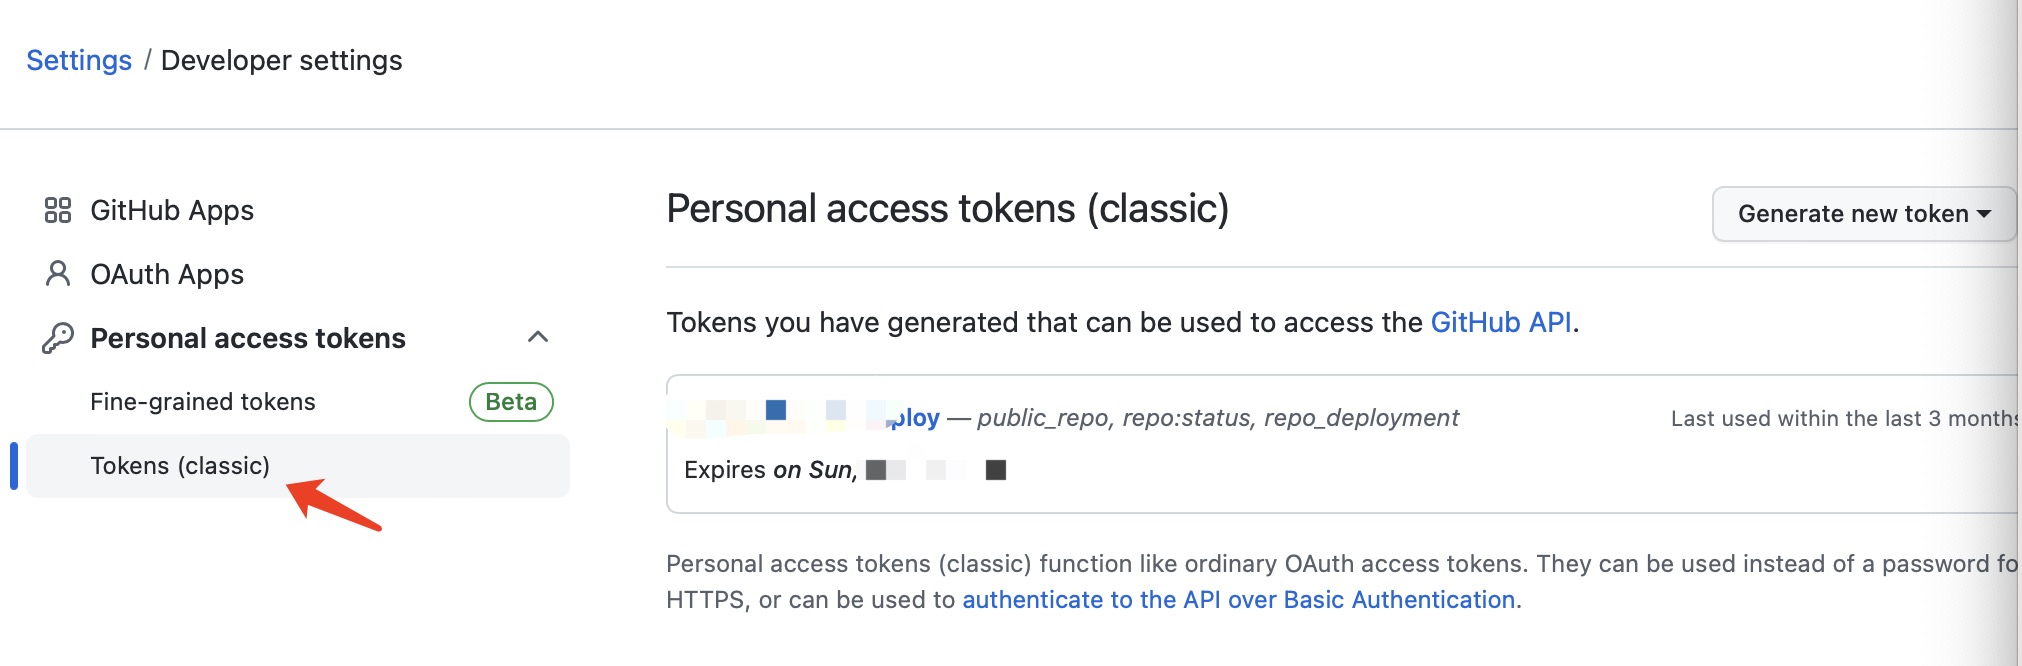 Authentication failed - Personal access tokens